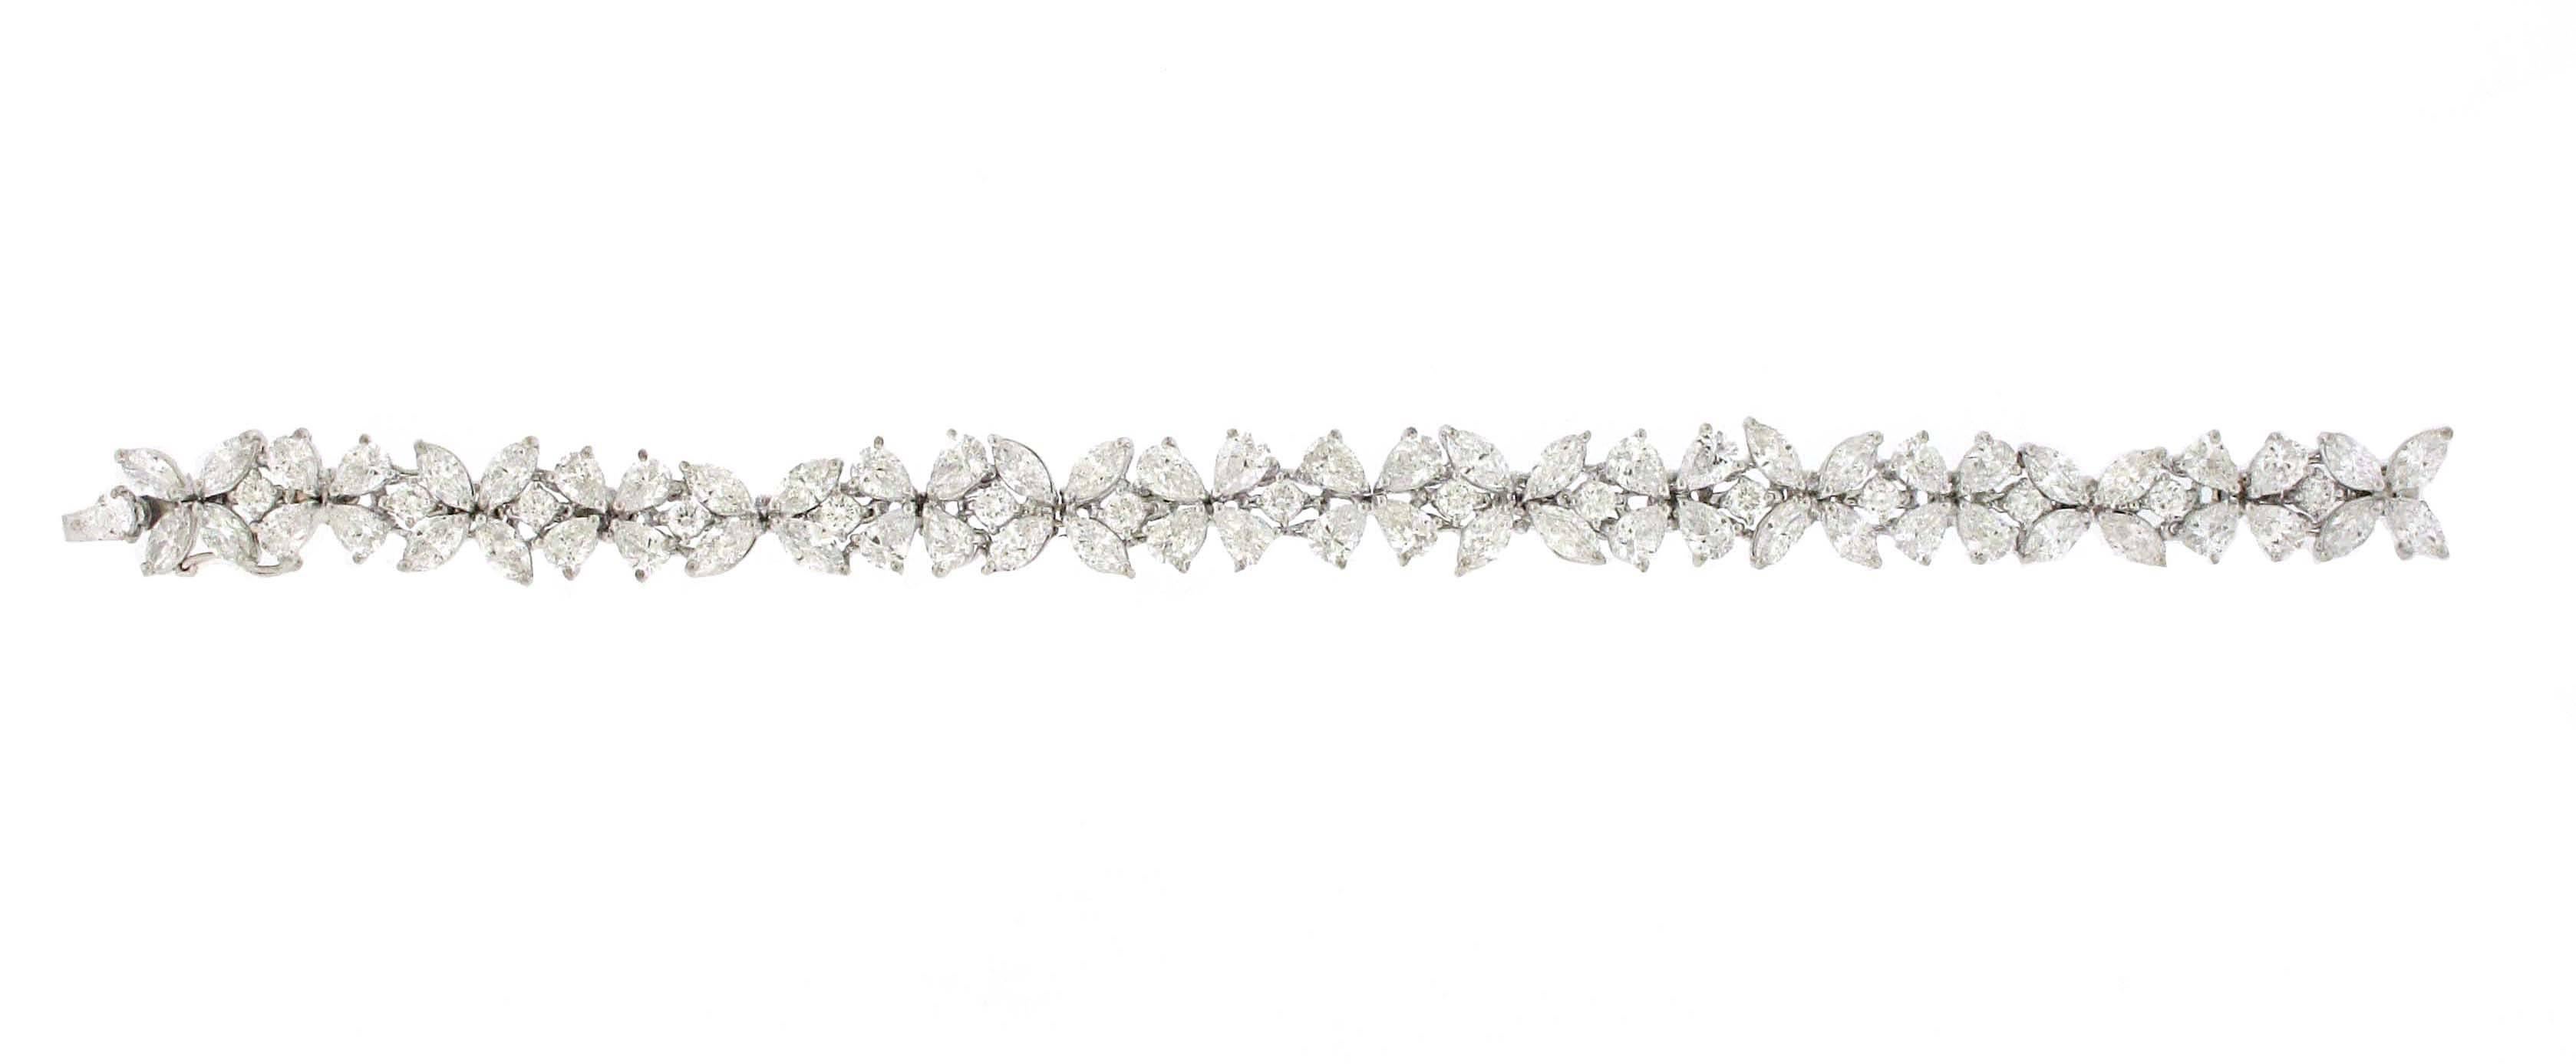 Extremely well made fancy cut diamond bracelet. This is the same style bracelet Harry Winston has become famous for. They are more commonly referred to as cluster flower bracelets. All of the diamonds in this bracelet are of extremely high quality.